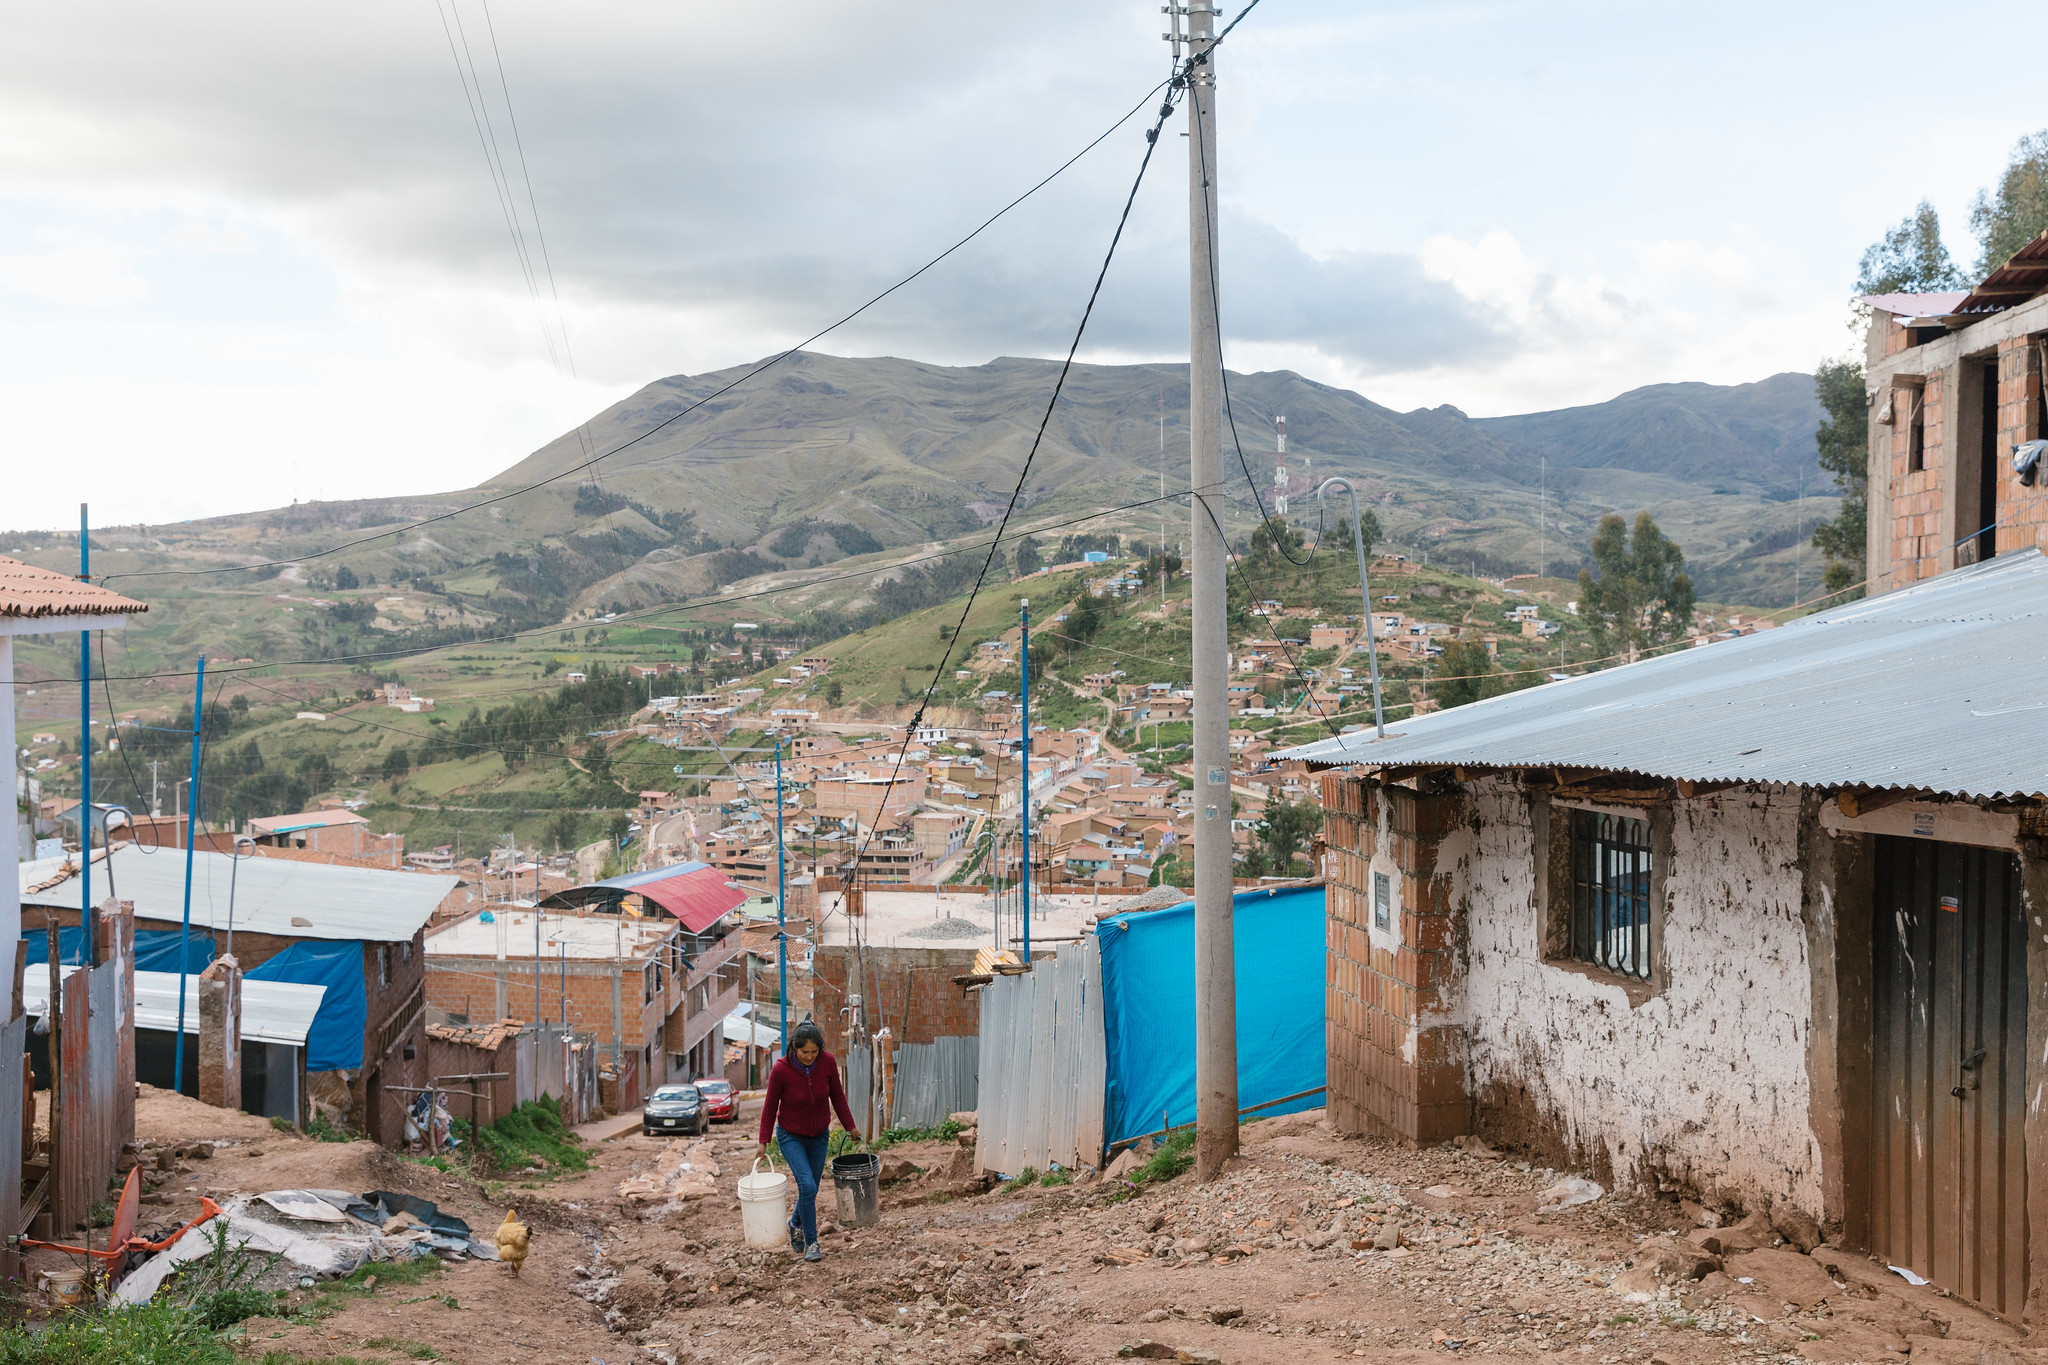 Examining Poverty and Inequality in Latin America's Countryside